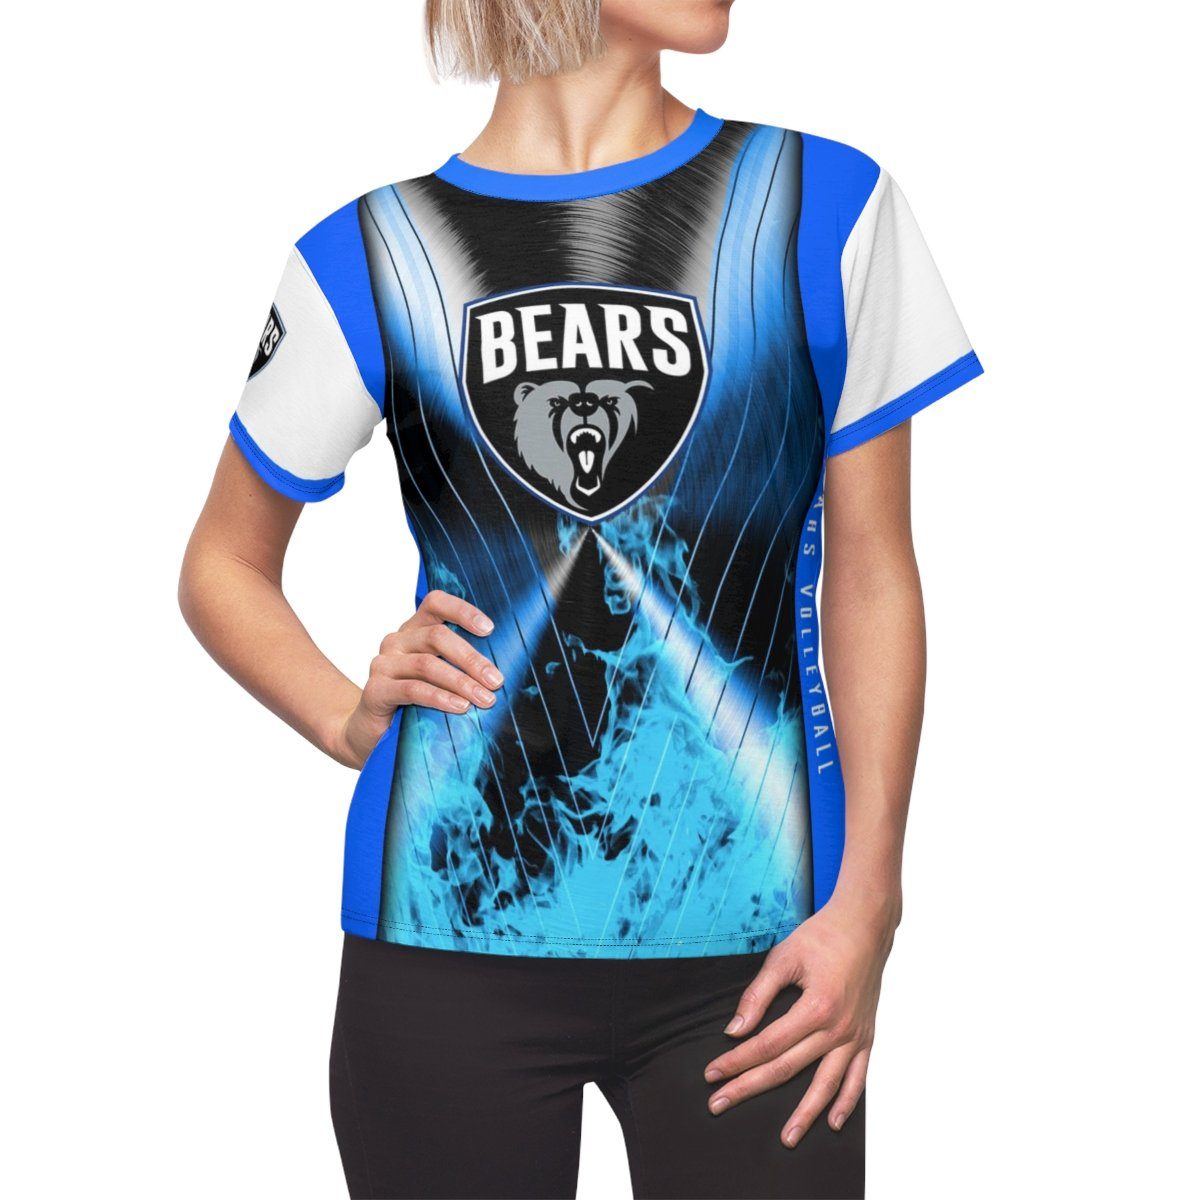 Spin - V.4 - Extreme Sportswear Women's Cut & Sew Template-Photoshop Template - PSMGraphix